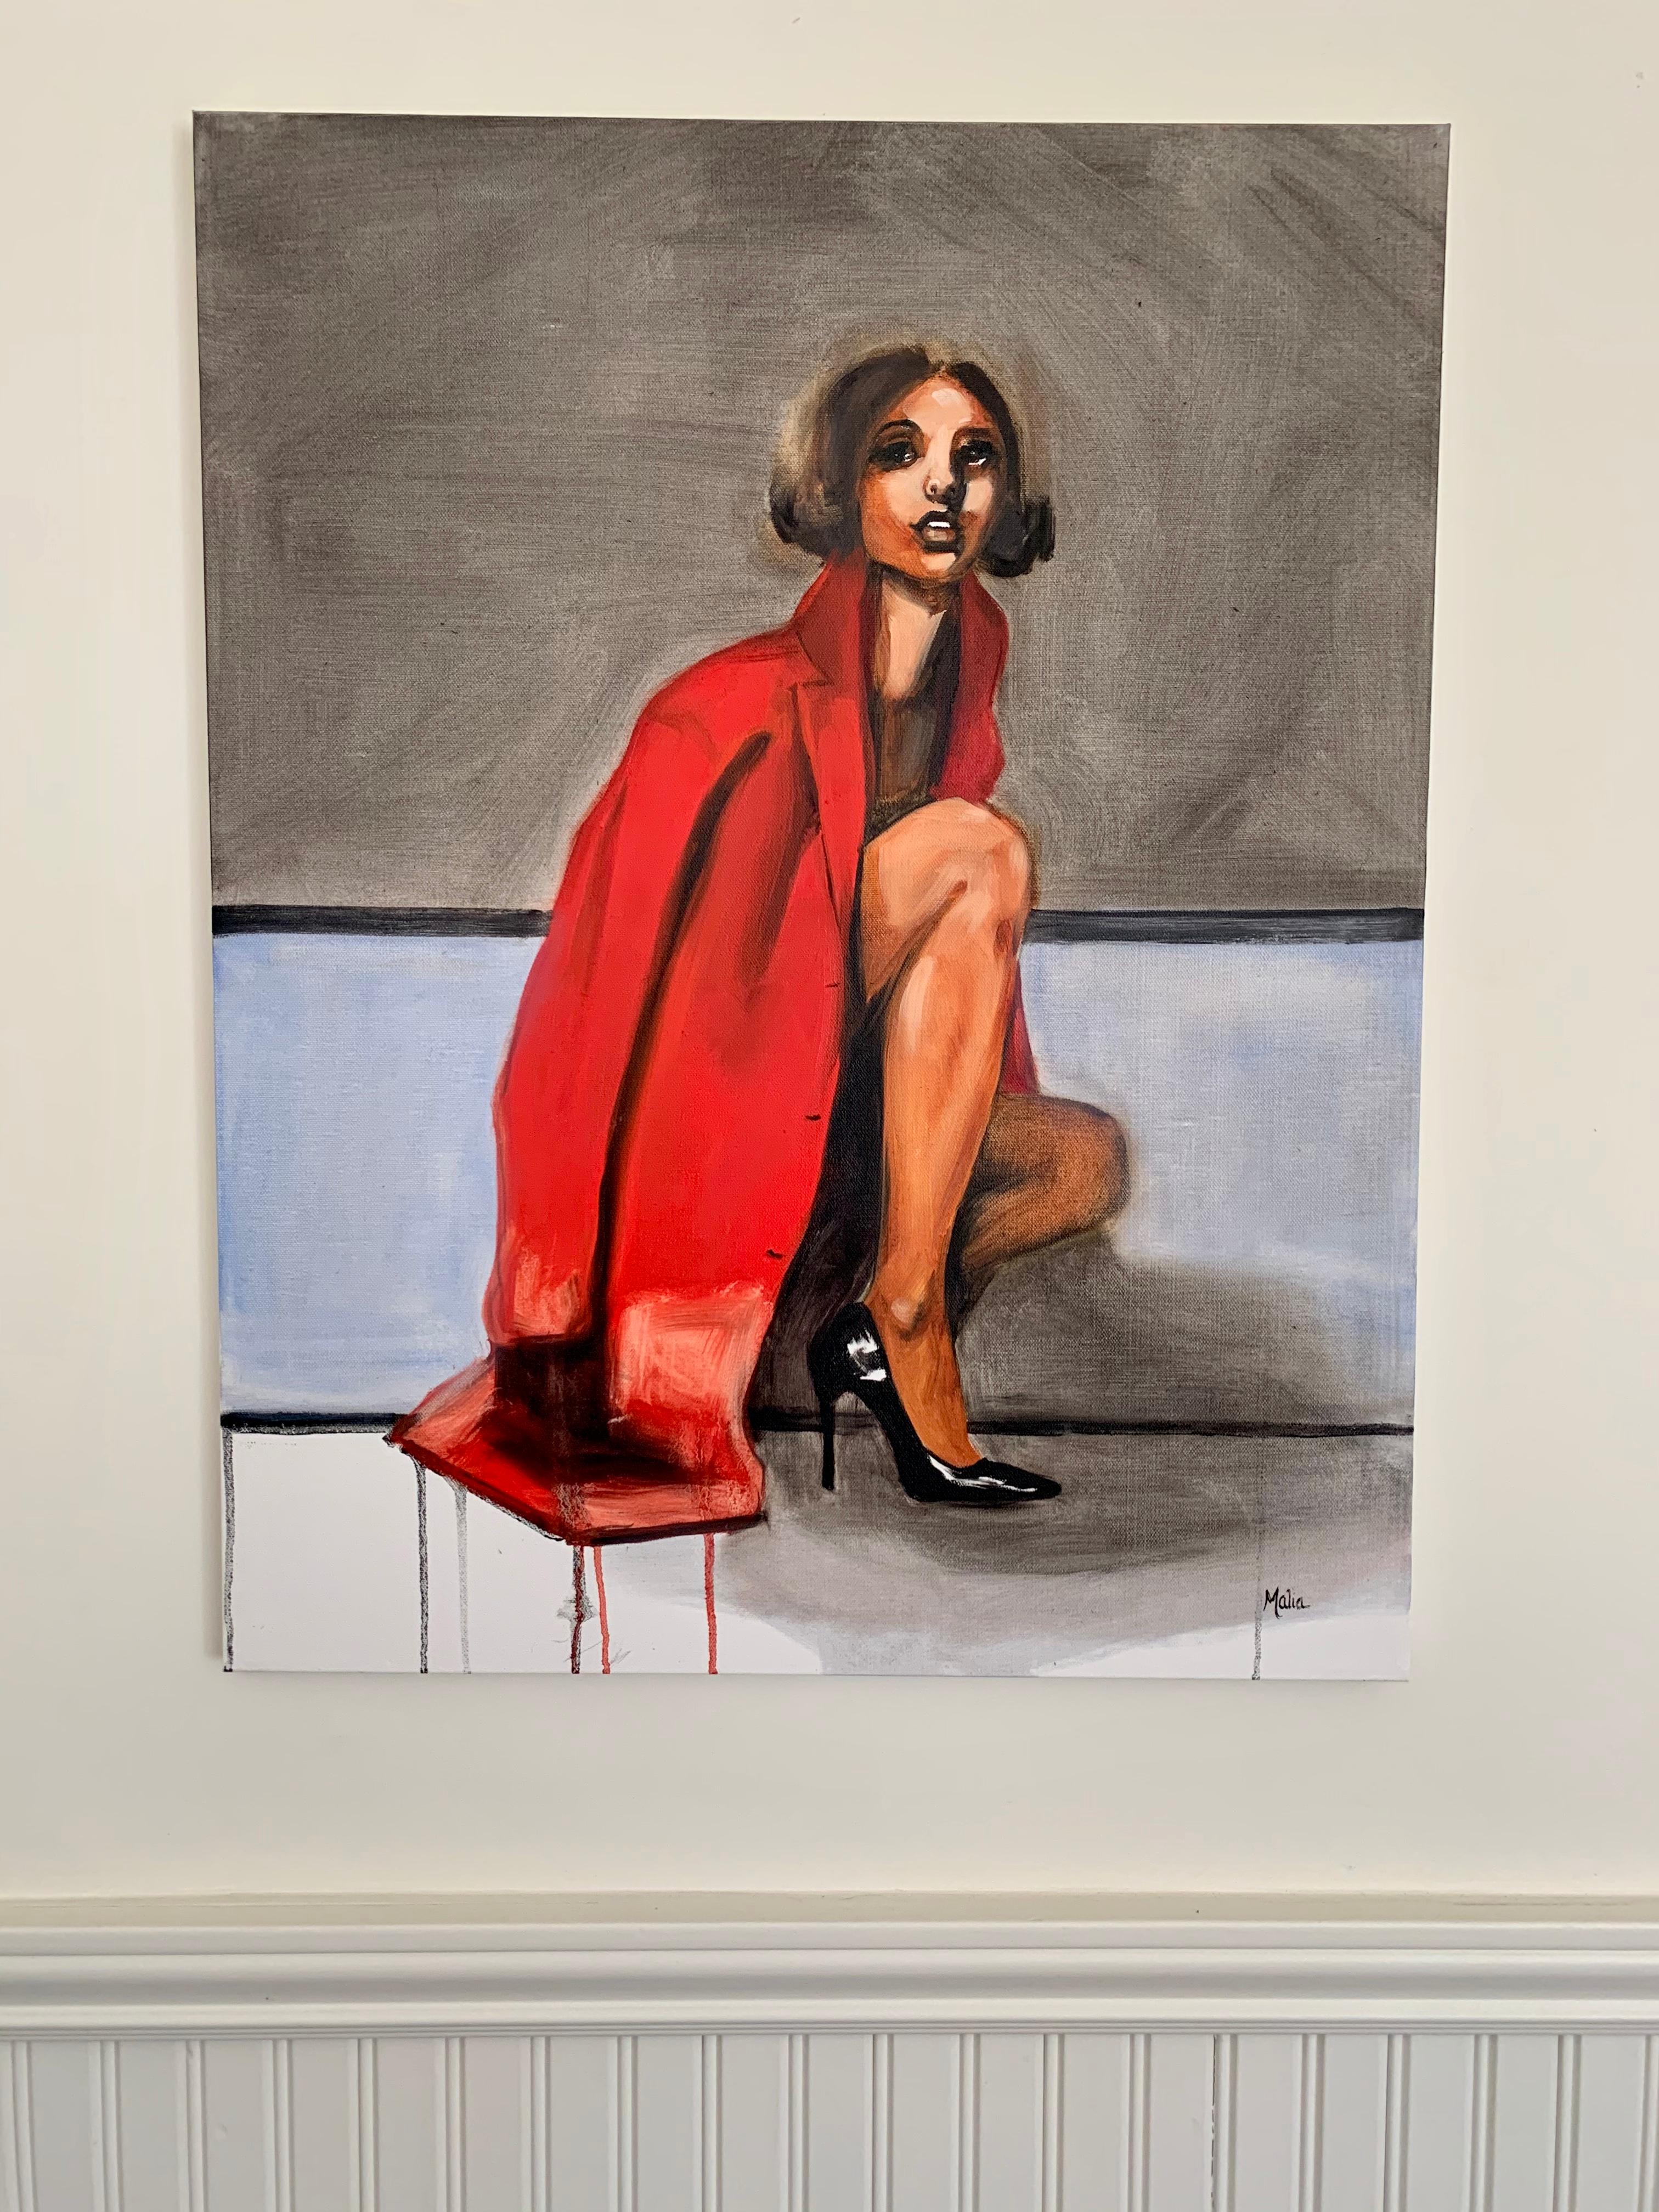 <p>Artist Comments<br>A woman in a brilliant red trench and heels kneels down, but she looks up and away. Her pose and gaze build a mysterious allure. The bands of horizontal grey and blue that frame the scene balance the powerful vertical lines and